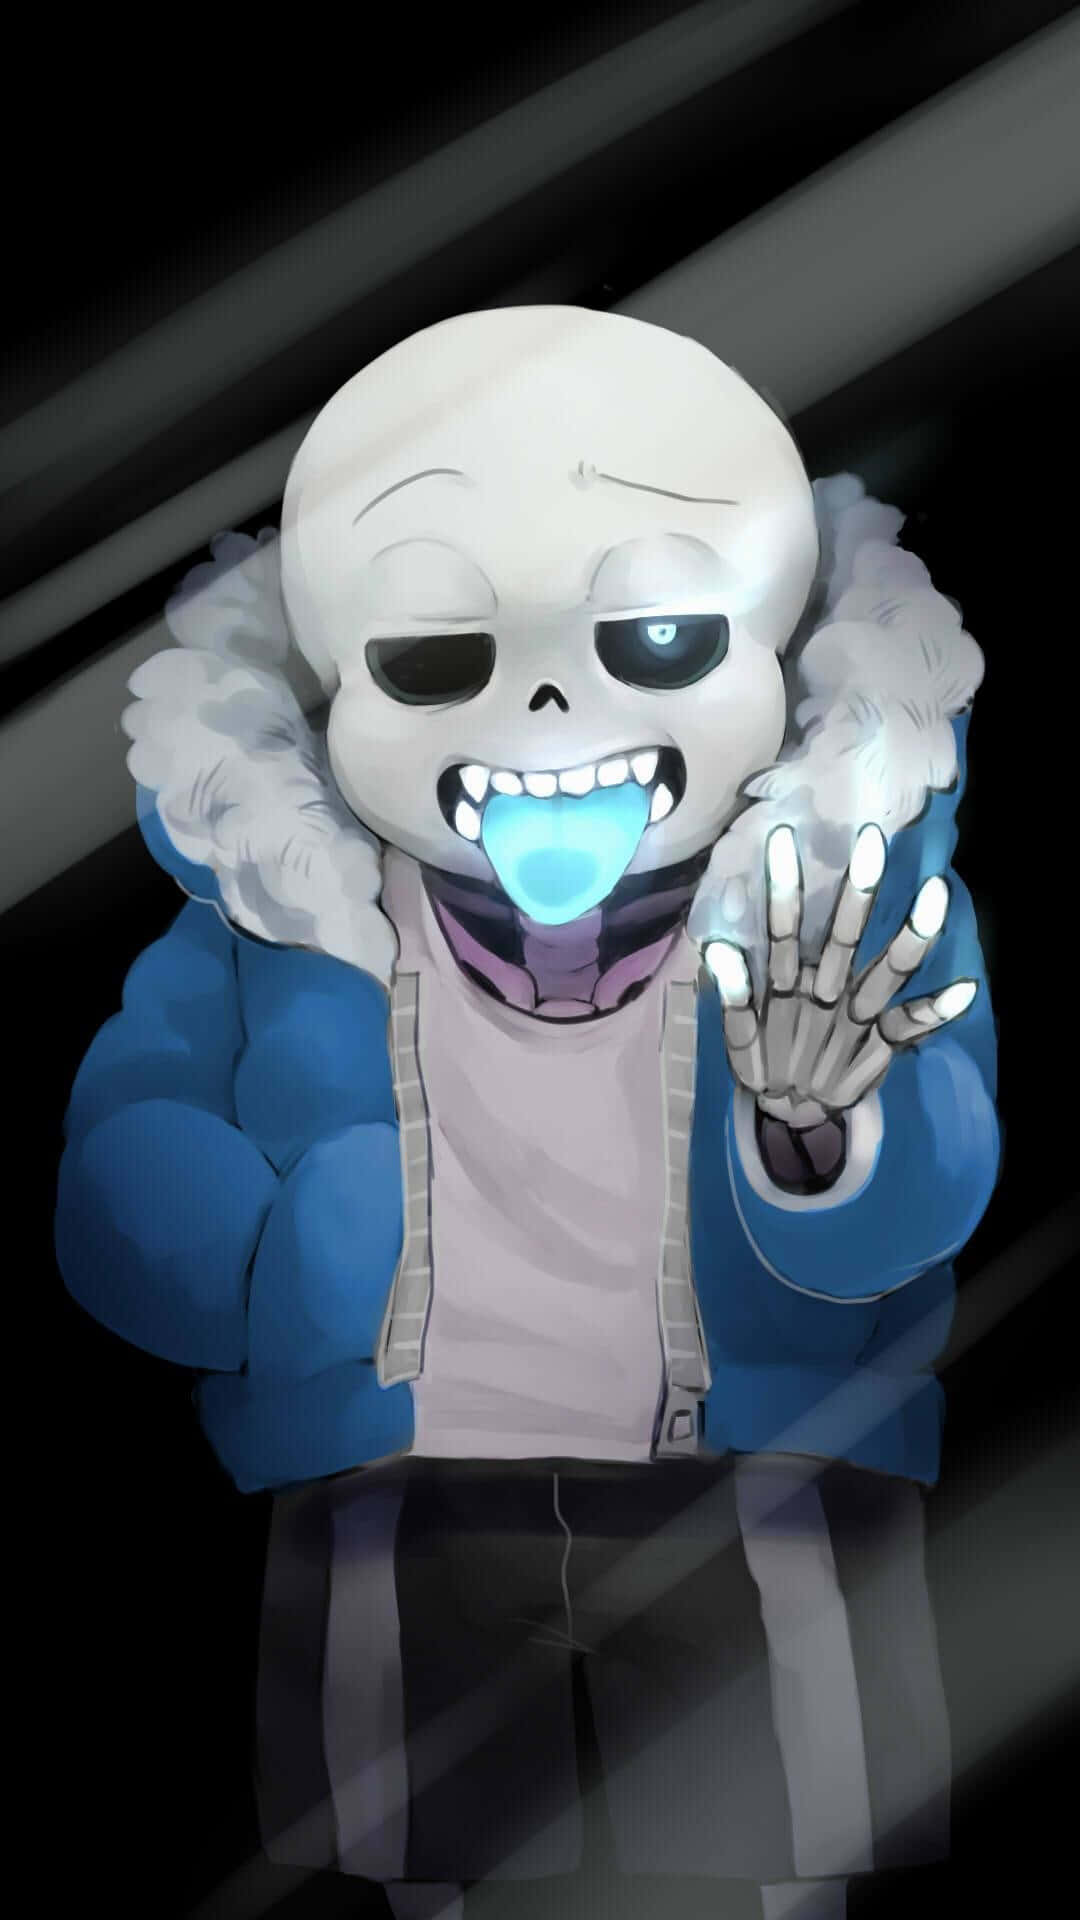 Have Fun Exploring the Undertale World on Your Phone Wallpaper